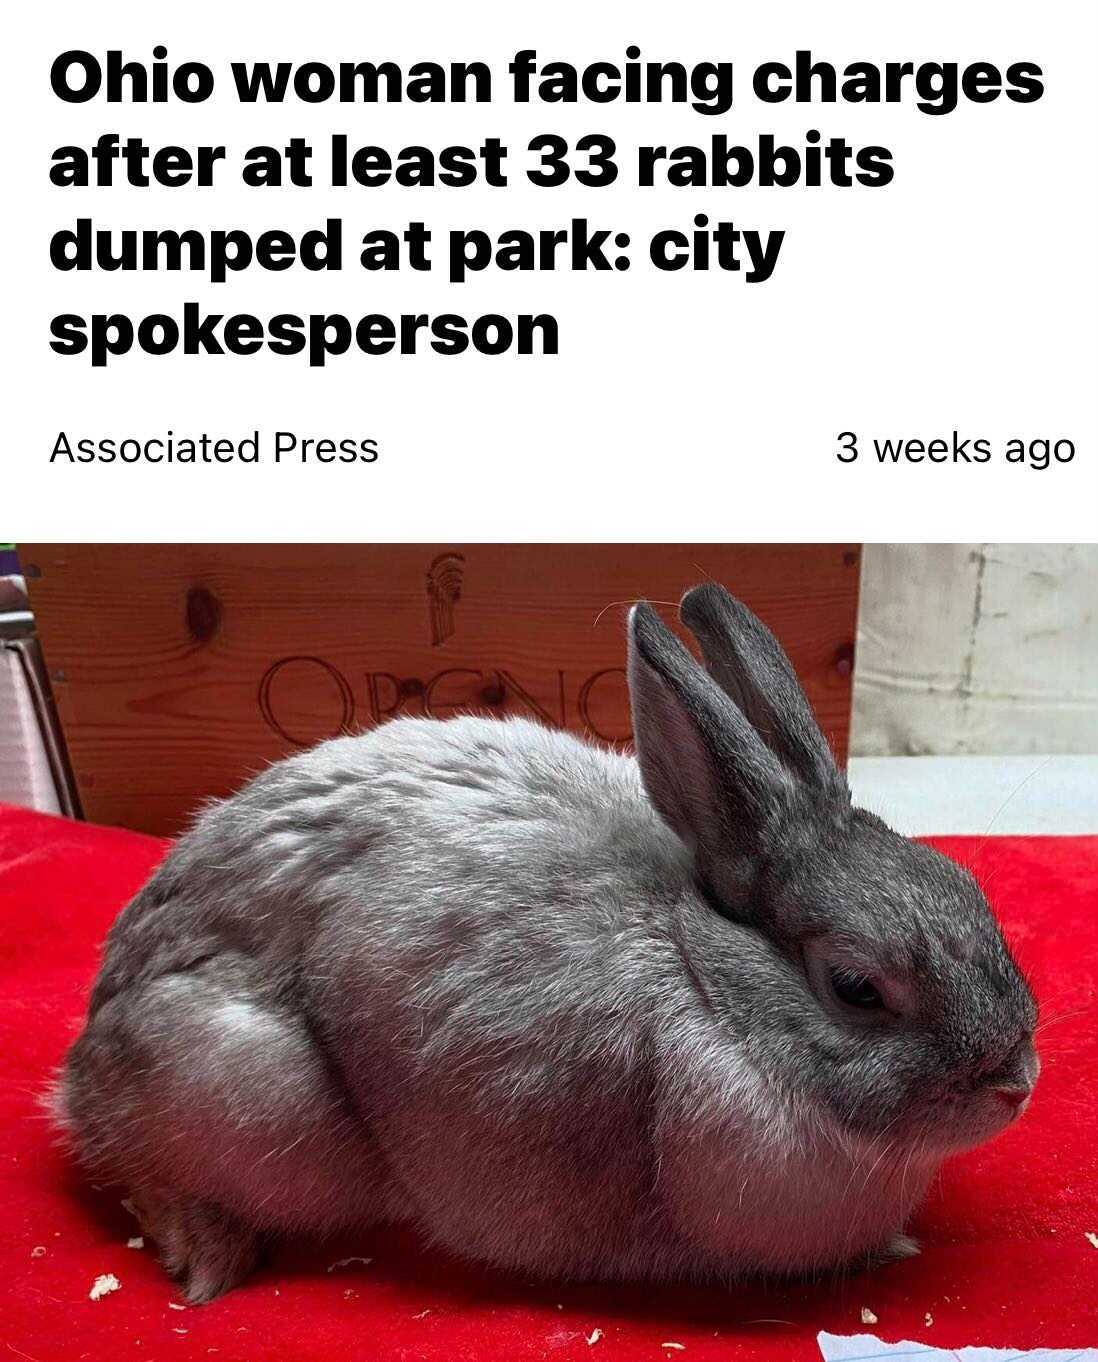 fauna - Ohio woman facing charges after at least 33 rabbits dumped at park city spokesperson Associated Press 3 weeks ago O